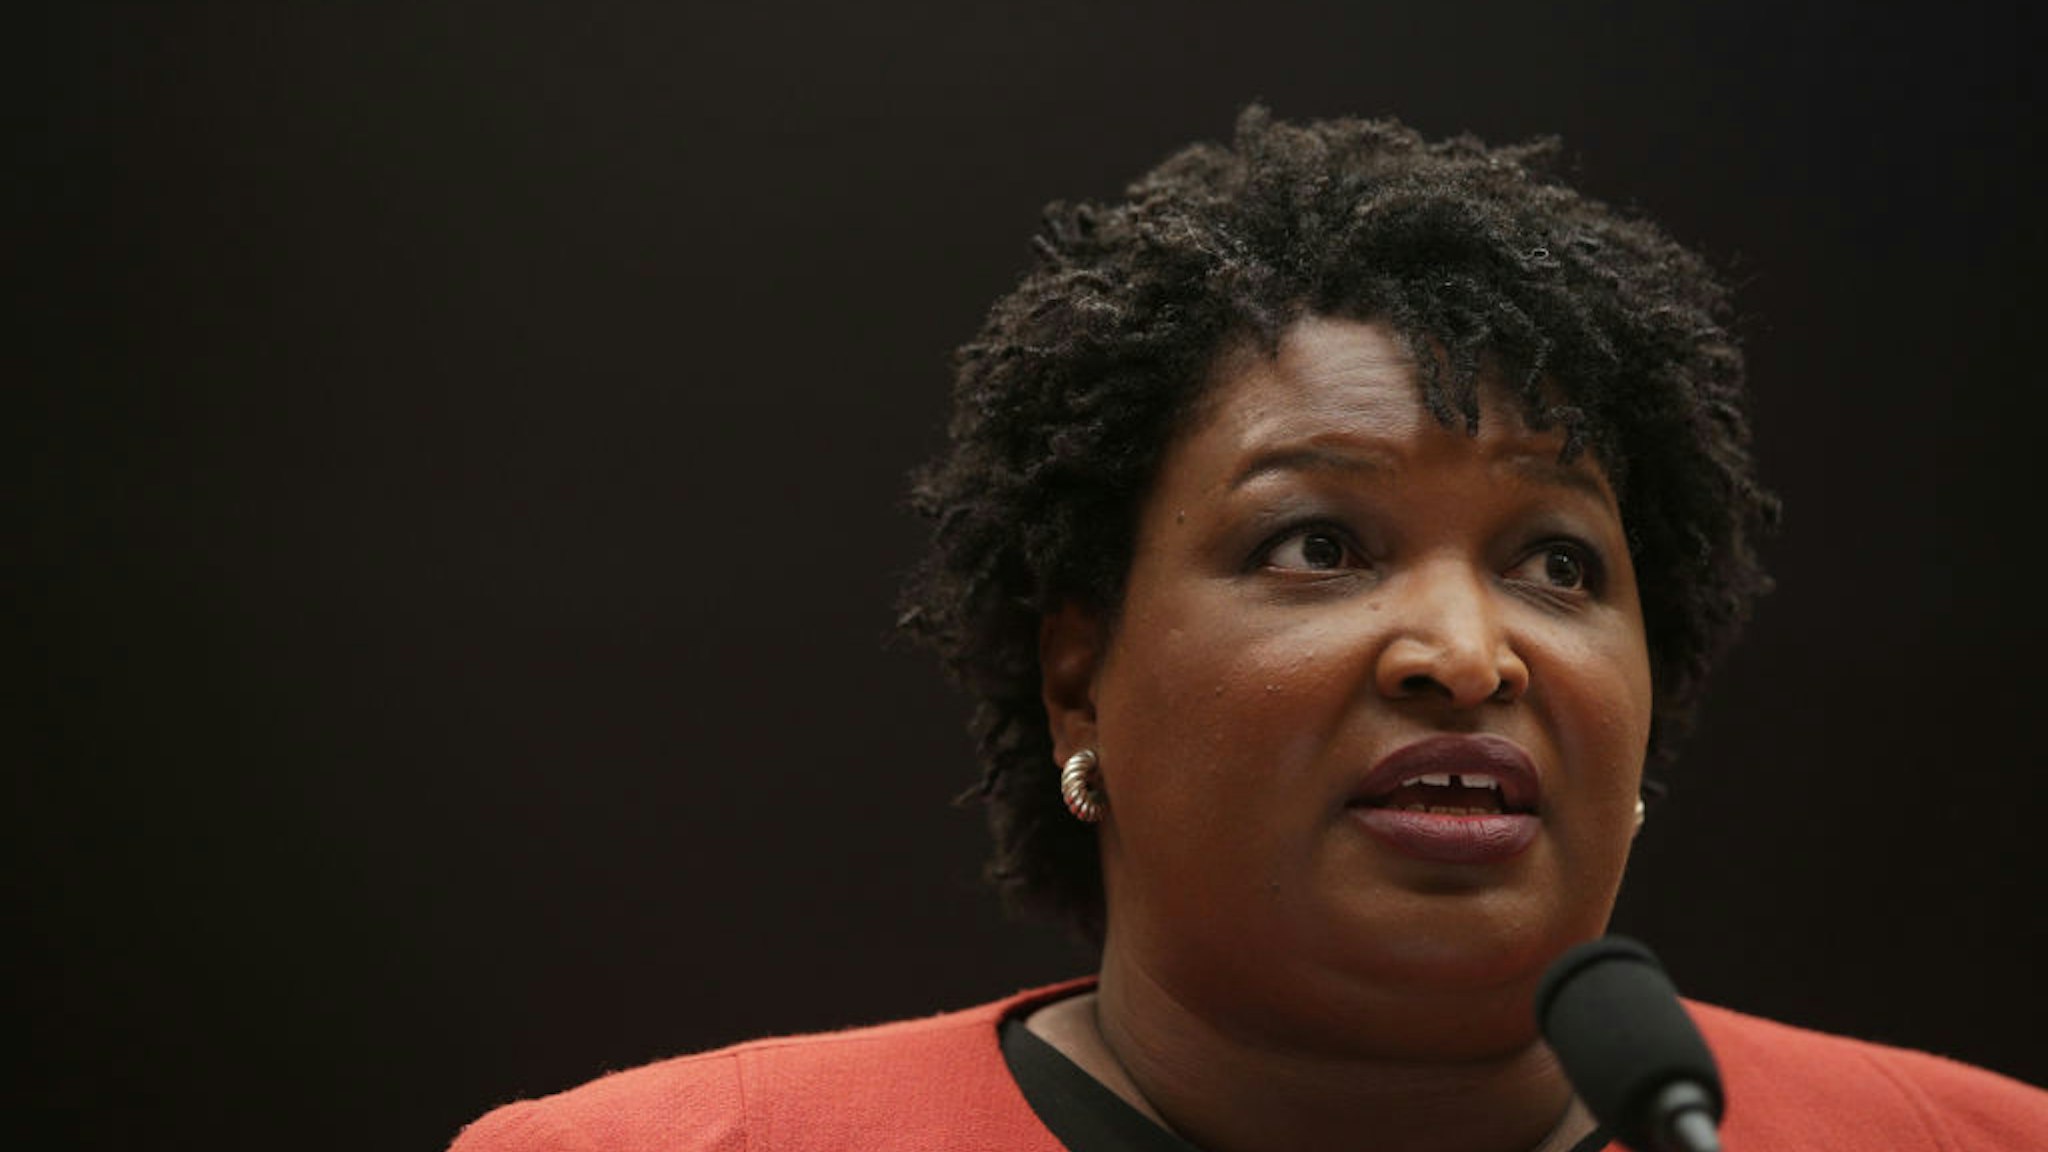 Stacey Abrams testifies during a hearing before the Constitution, Civil Rights and Civil Liberties Subcommittee of House Judiciary Committee